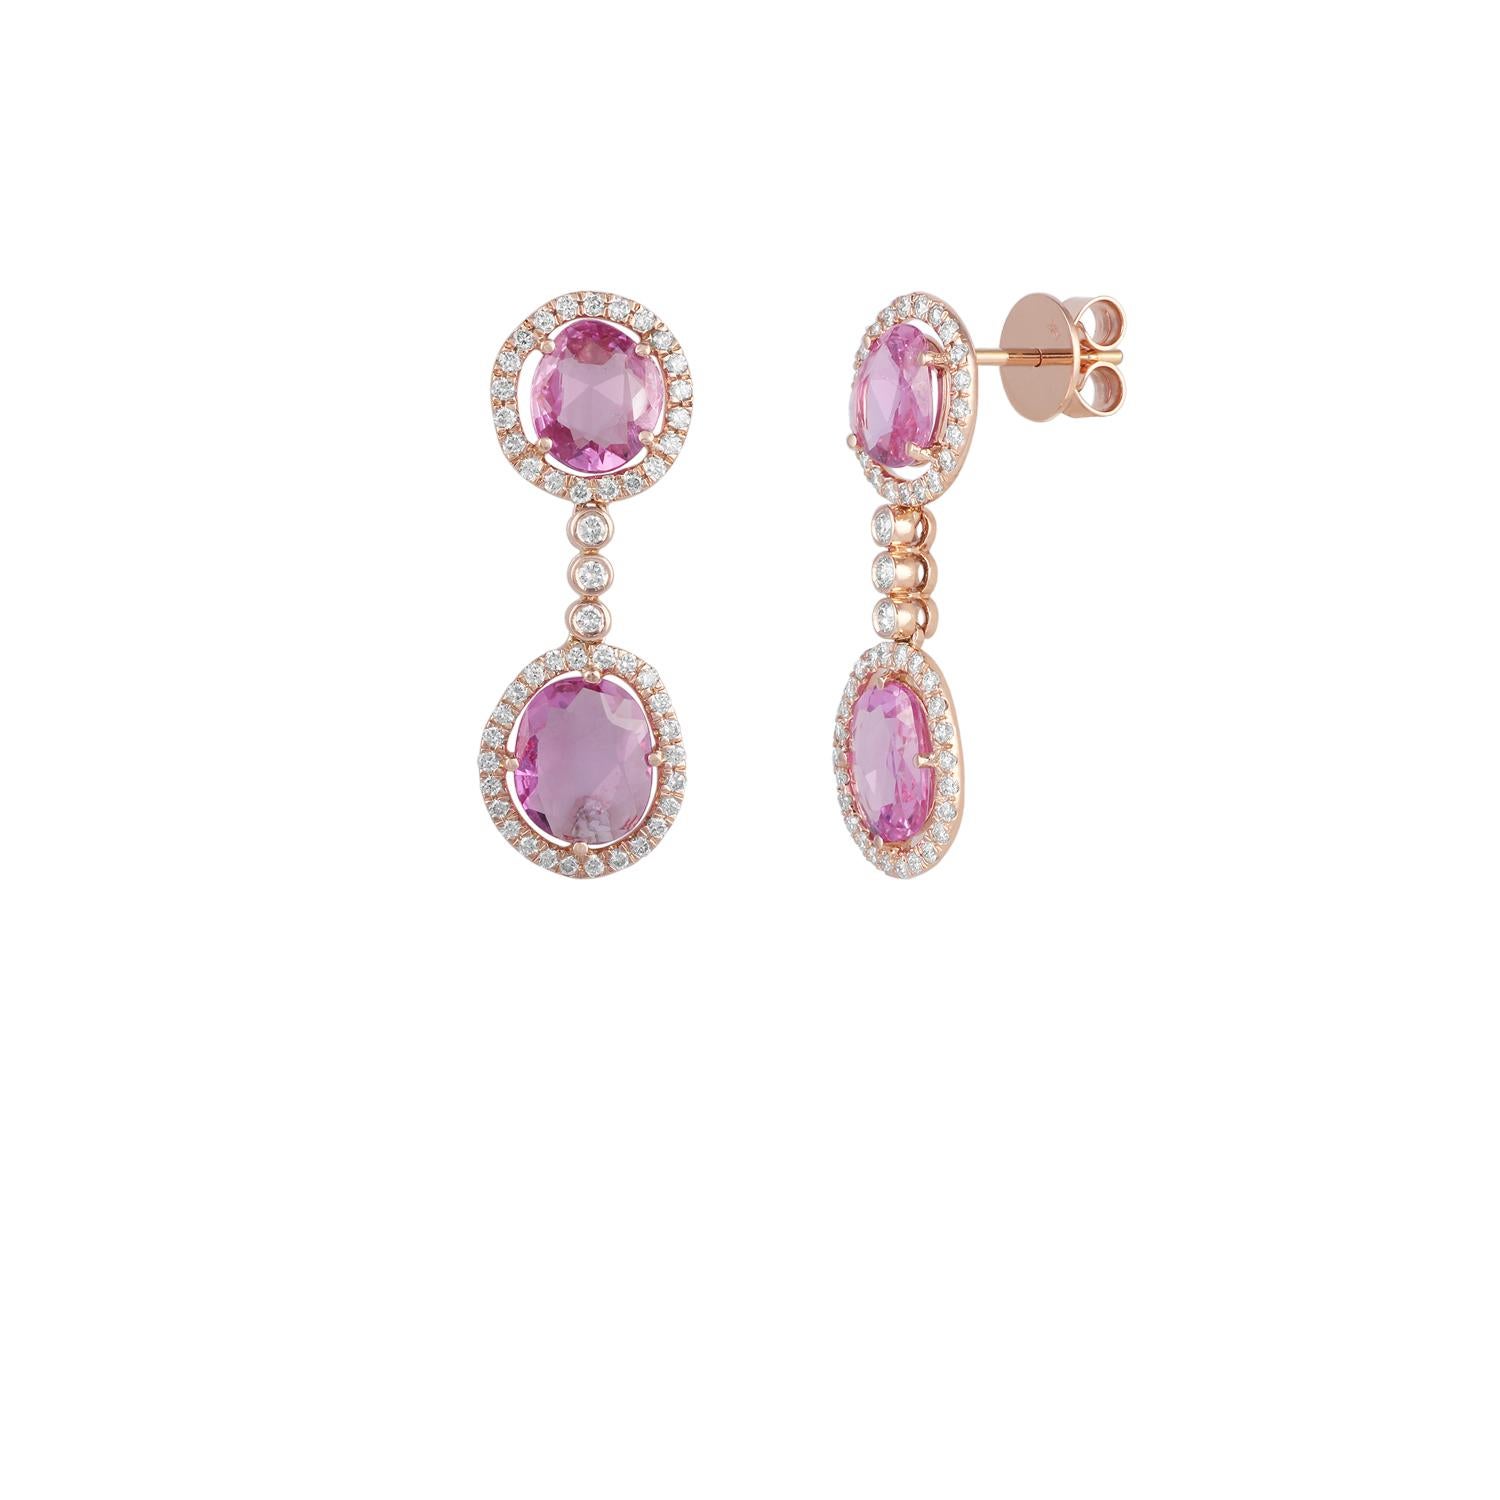 Contemporary Rose Cut Pink Sapphire and Diamond Earring Studded in 18 Karat Rose Gold